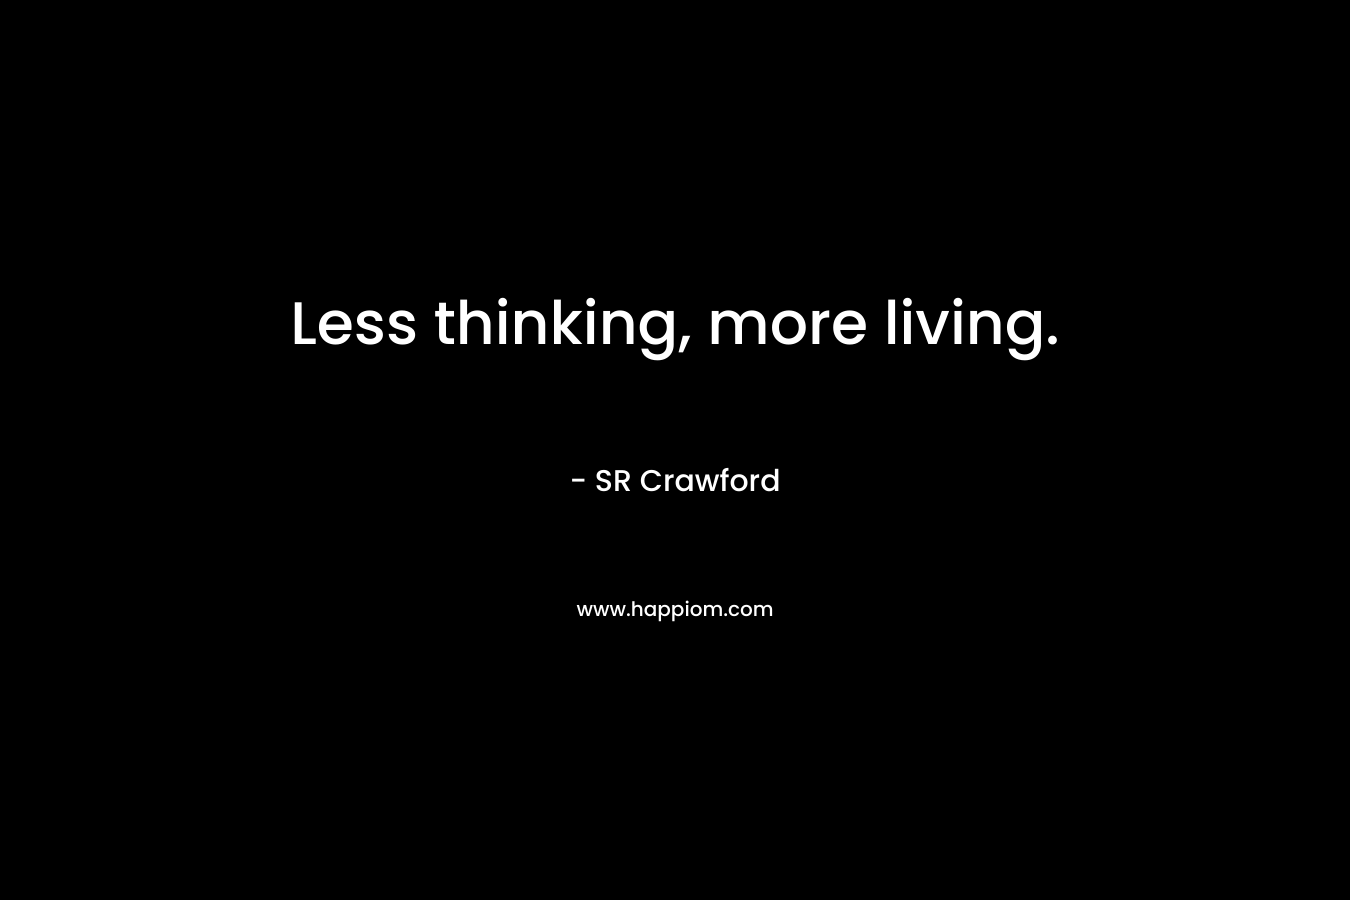 Less thinking, more living.